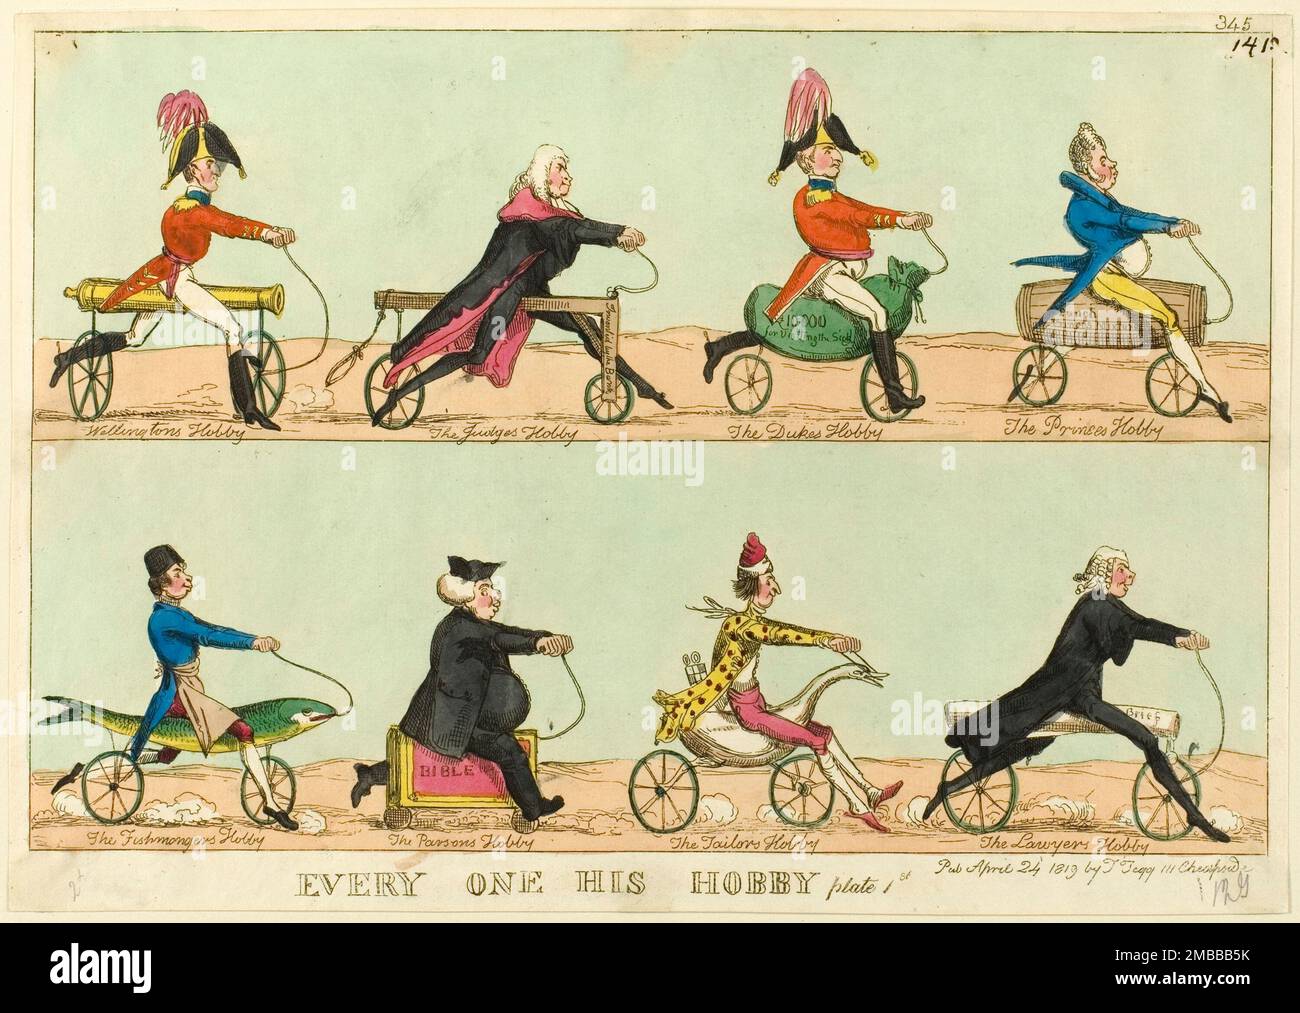 Everyone His Hobby, plate 1, published April 24, 1819. Caricatures of men riding hobby horses (a forerunner of the bicycle) designed to reflect their profession: 'Wellington's Hobby [Duke of Wellington astride a cannon], The Judge's Hobby [a gibbet], The Duke's Hobby [sack of money: '&#xa3;10,000 for Visiting the Sick'], The Prince's Hobby [the Prince Regent on a barrel marked 'Punch, Princes Mixture], The Fishmonger's Hobby [fish-shaped hobby horse], The Parson's Hobby [a bible], The Tailor's Hobby [a swan], The Lawyer's Hobby' [document marked 'Brief']. Attributed to William Heath. Stock Photo